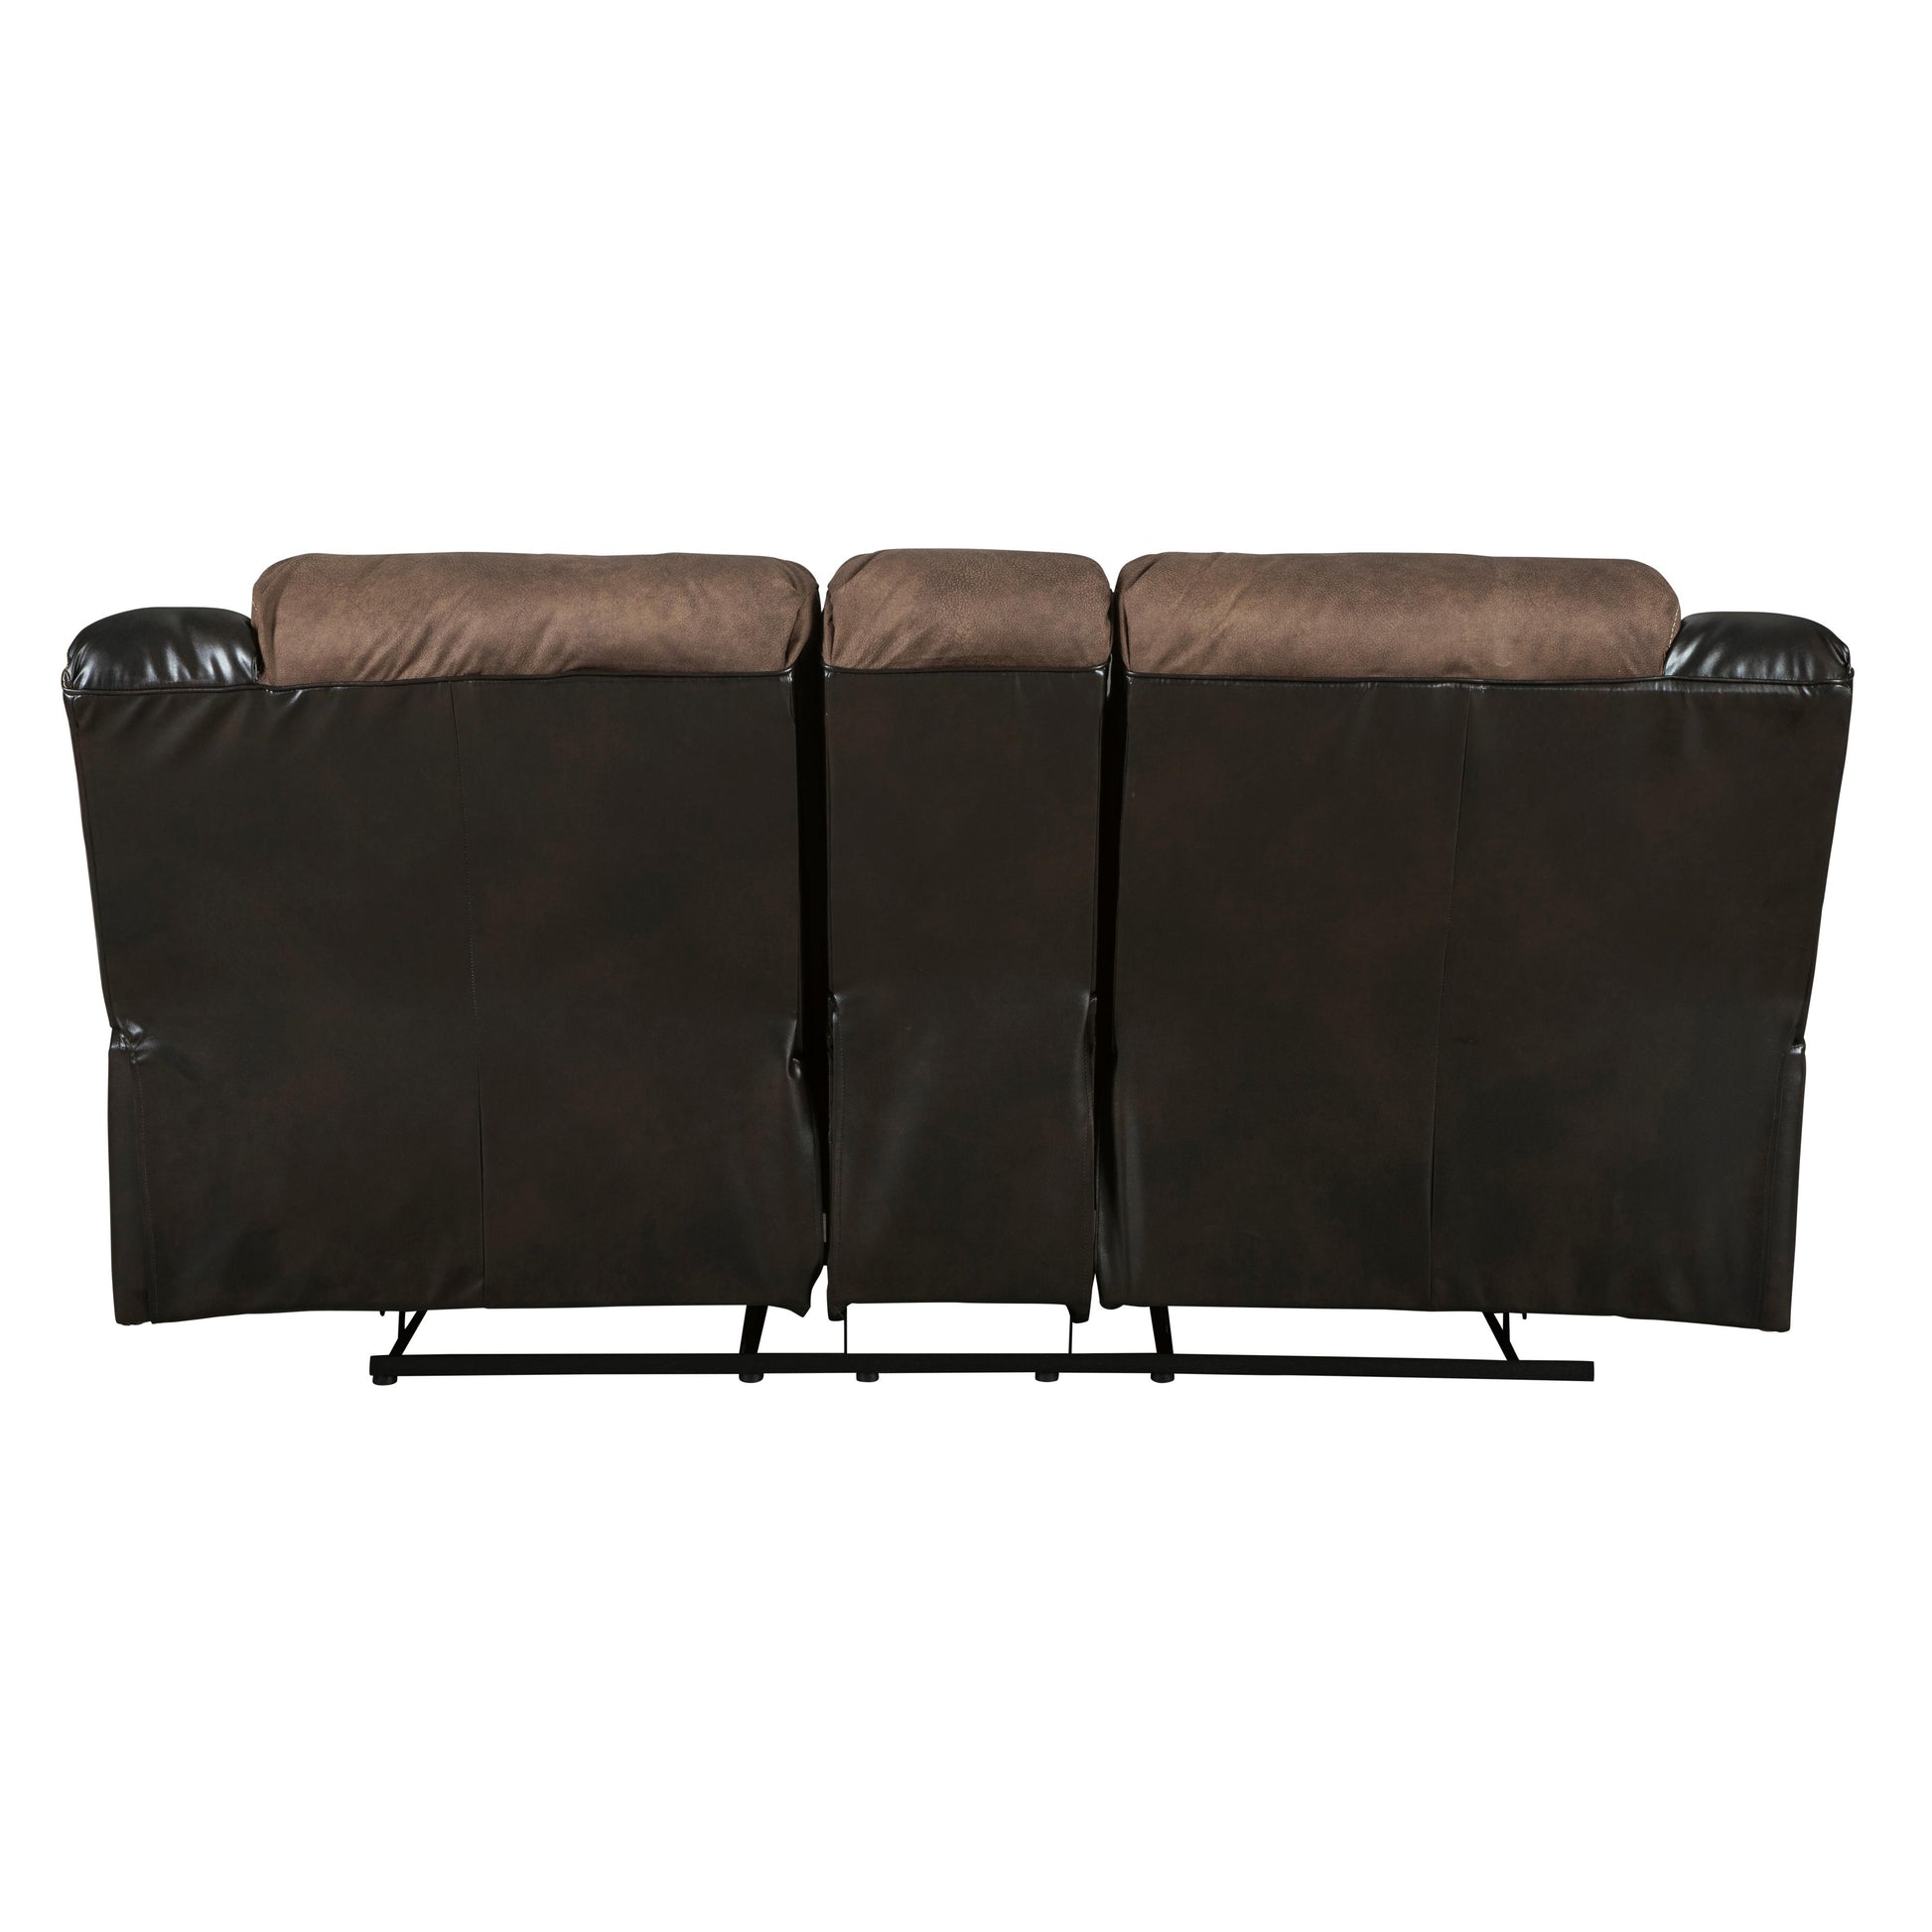 Signature Design by Ashley Earhart Reclining Fabric and Leather Look Loveseat 2910194